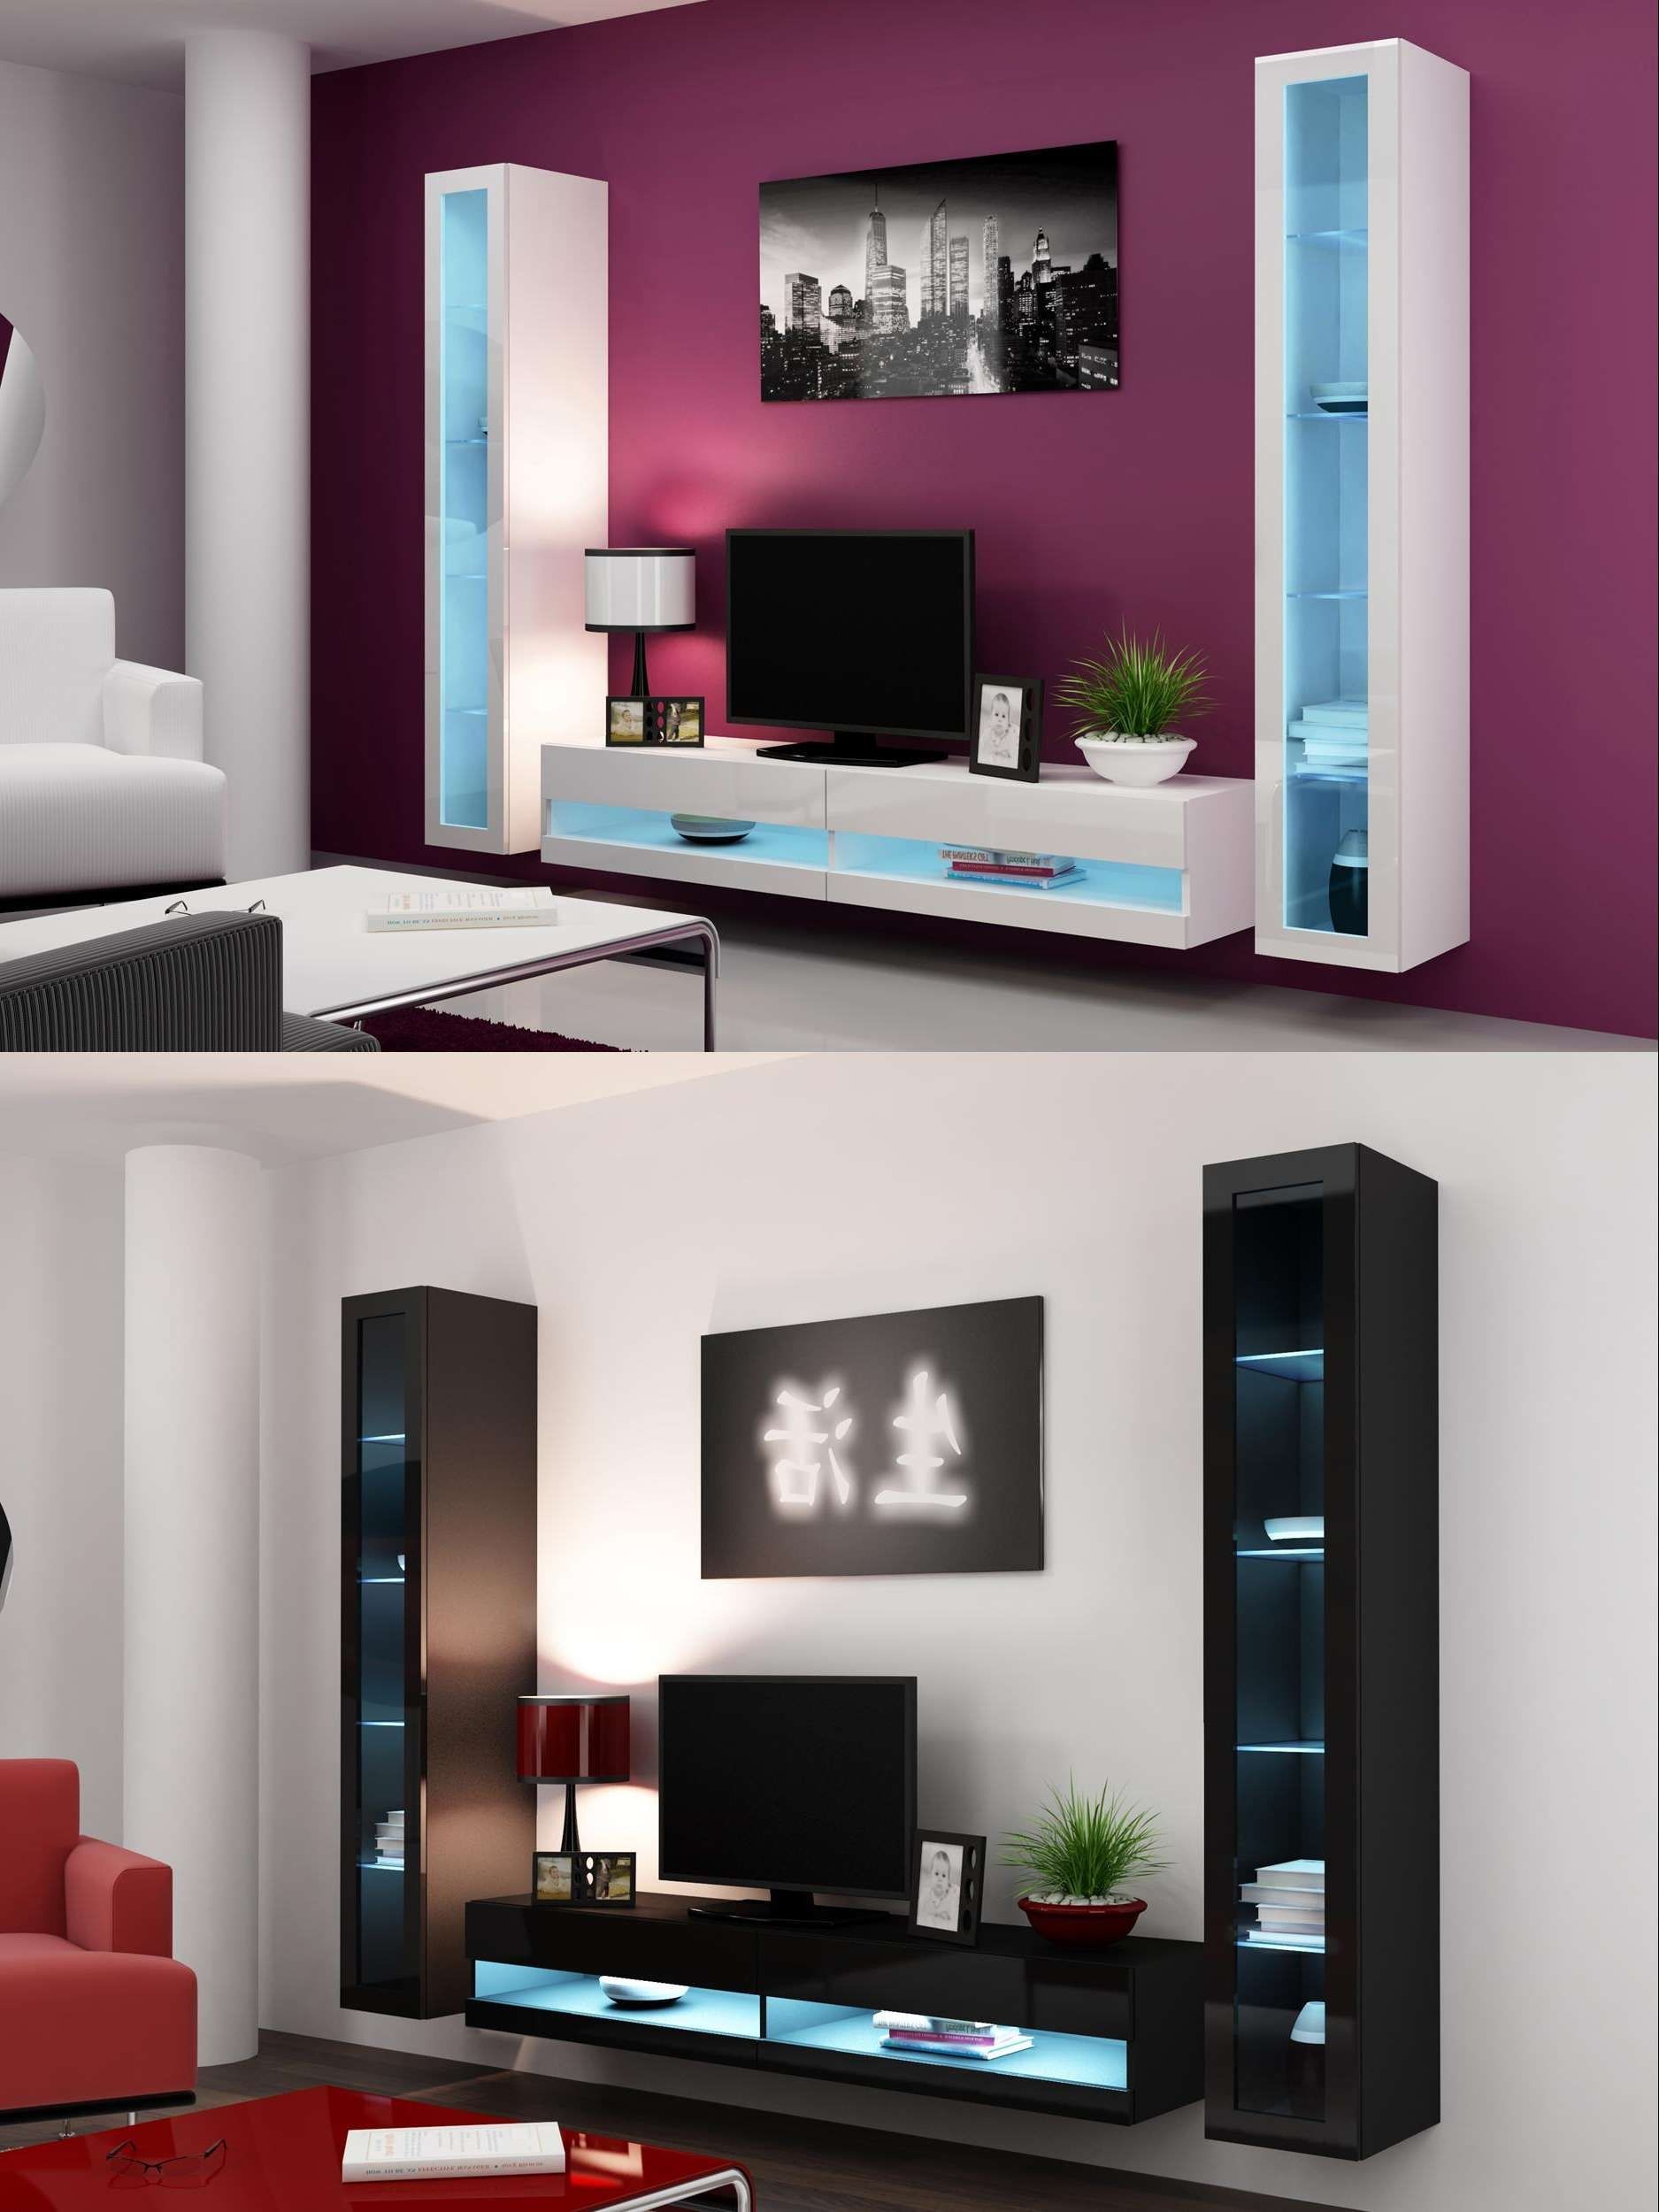 High Gloss Living Room Set With Led Lights, Tv Stand, Wall Mounted With Regard To High Gloss Tv Cabinets (View 9 of 20)